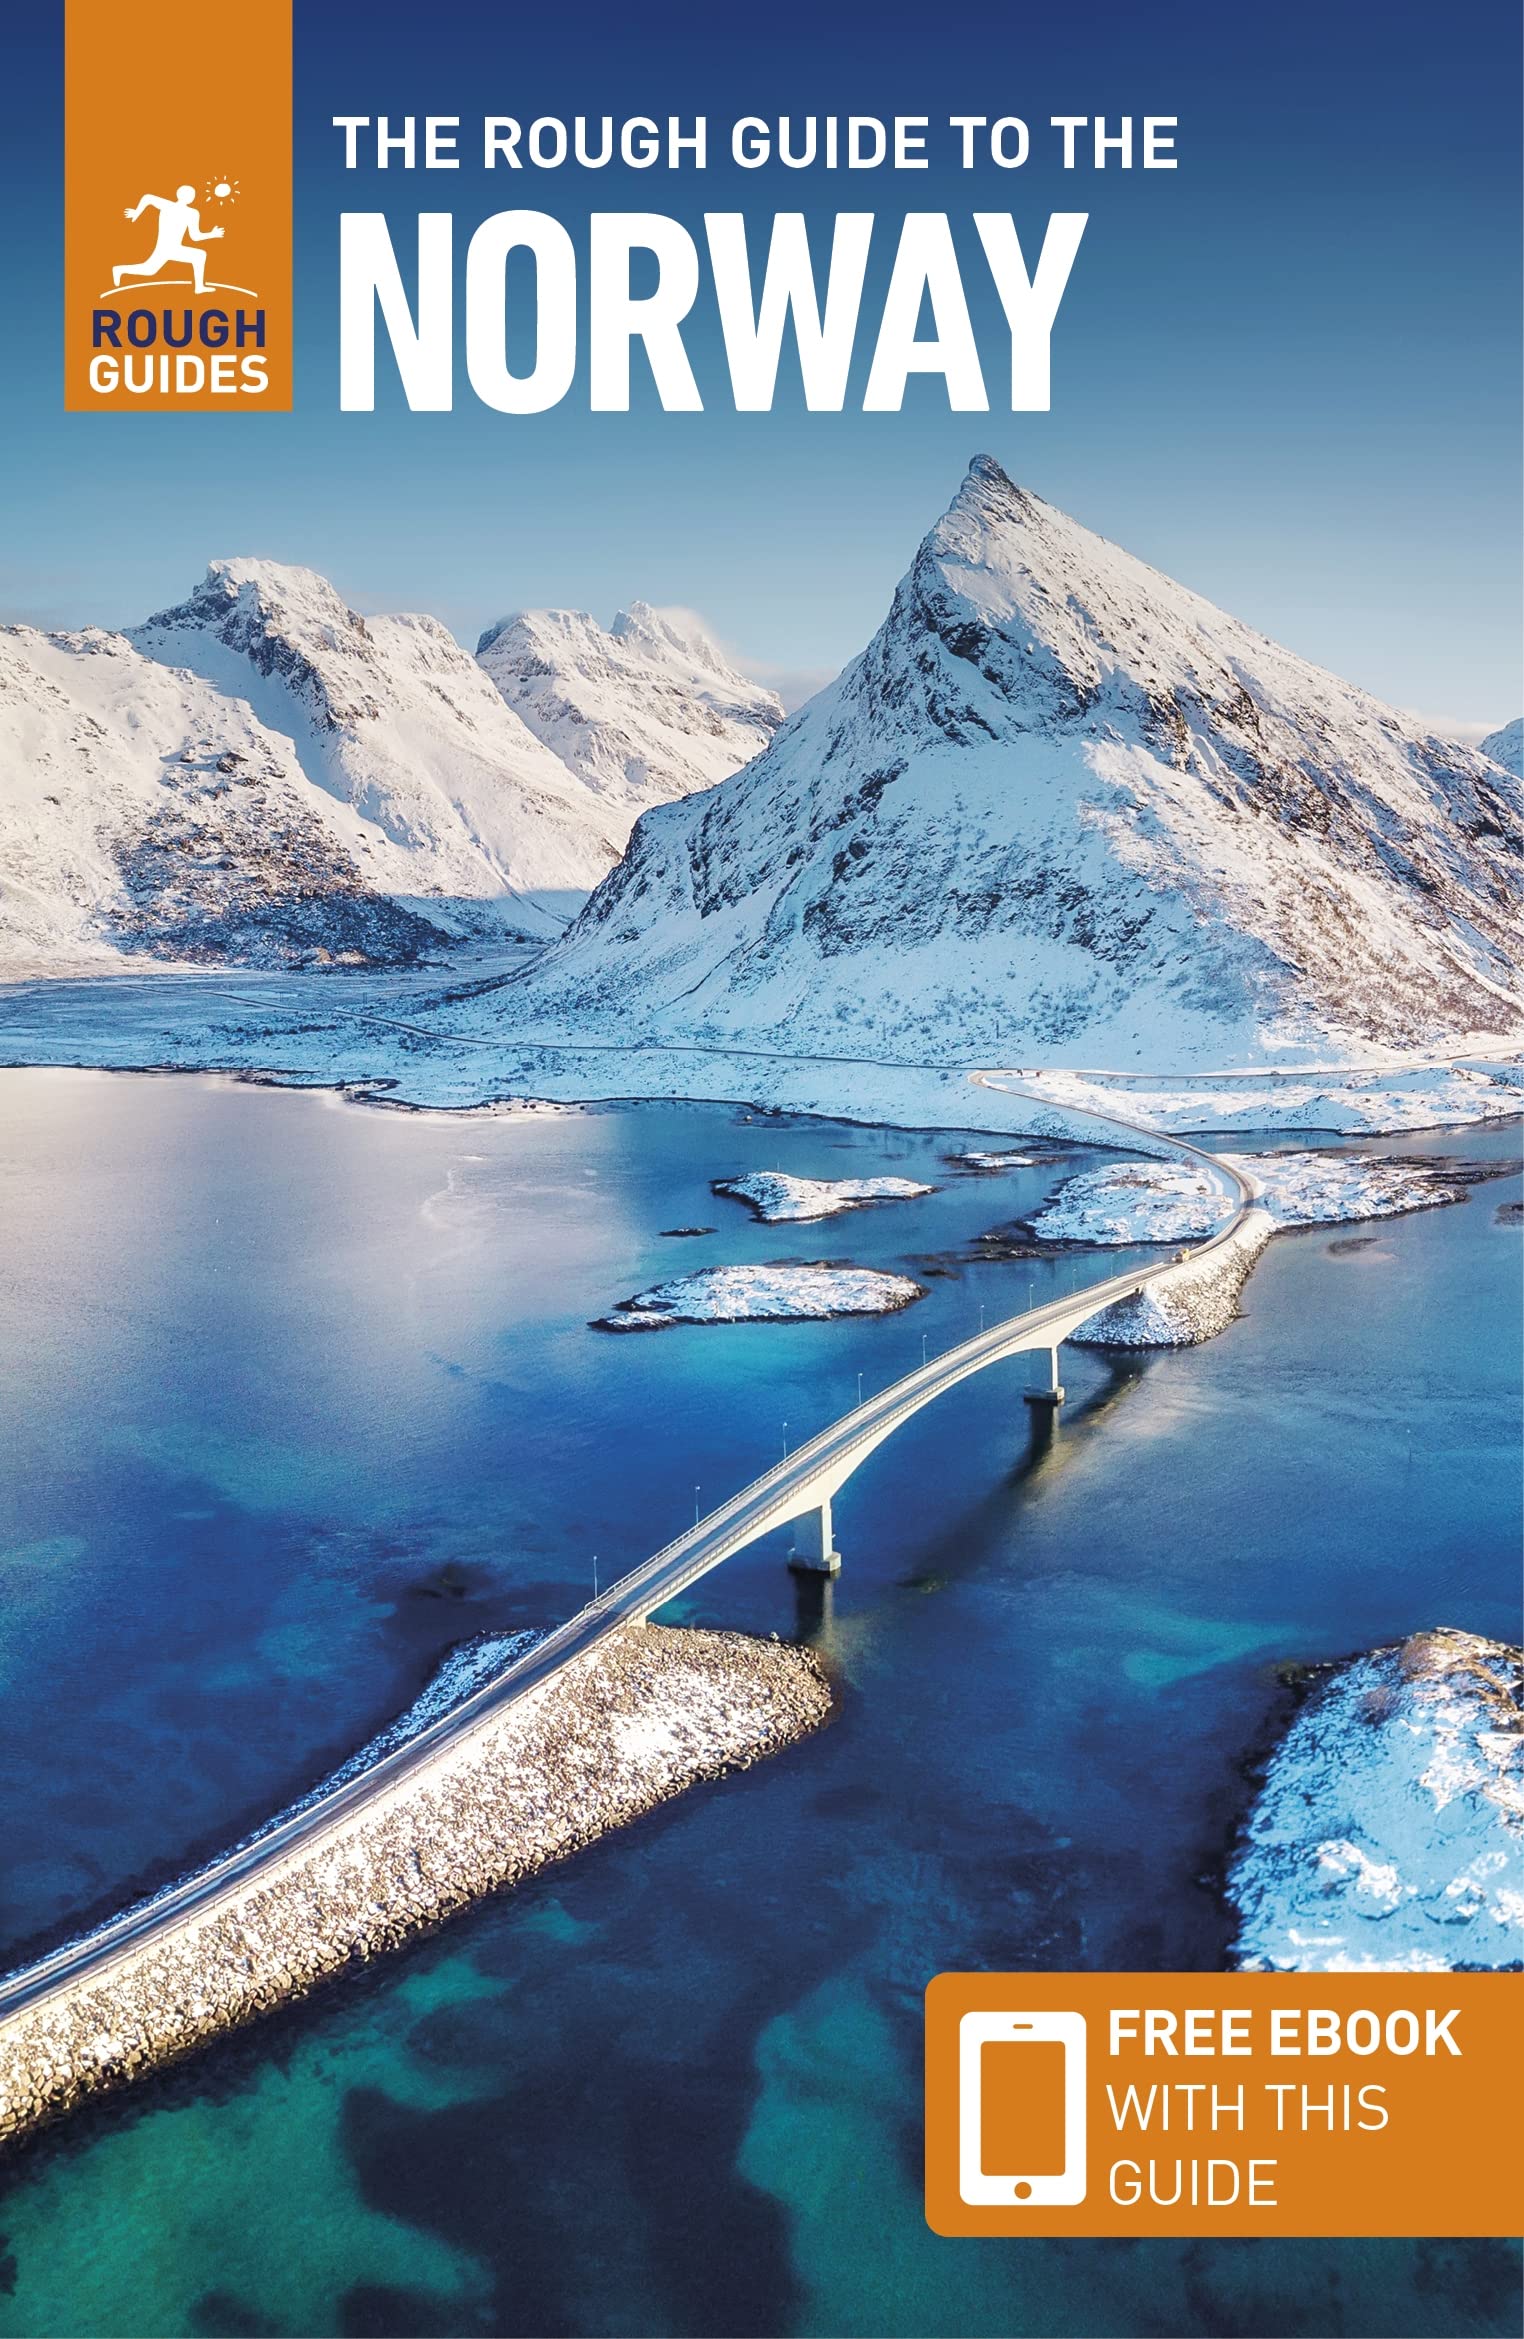 The Rough Guide to Norway (8th Edition) (2022)